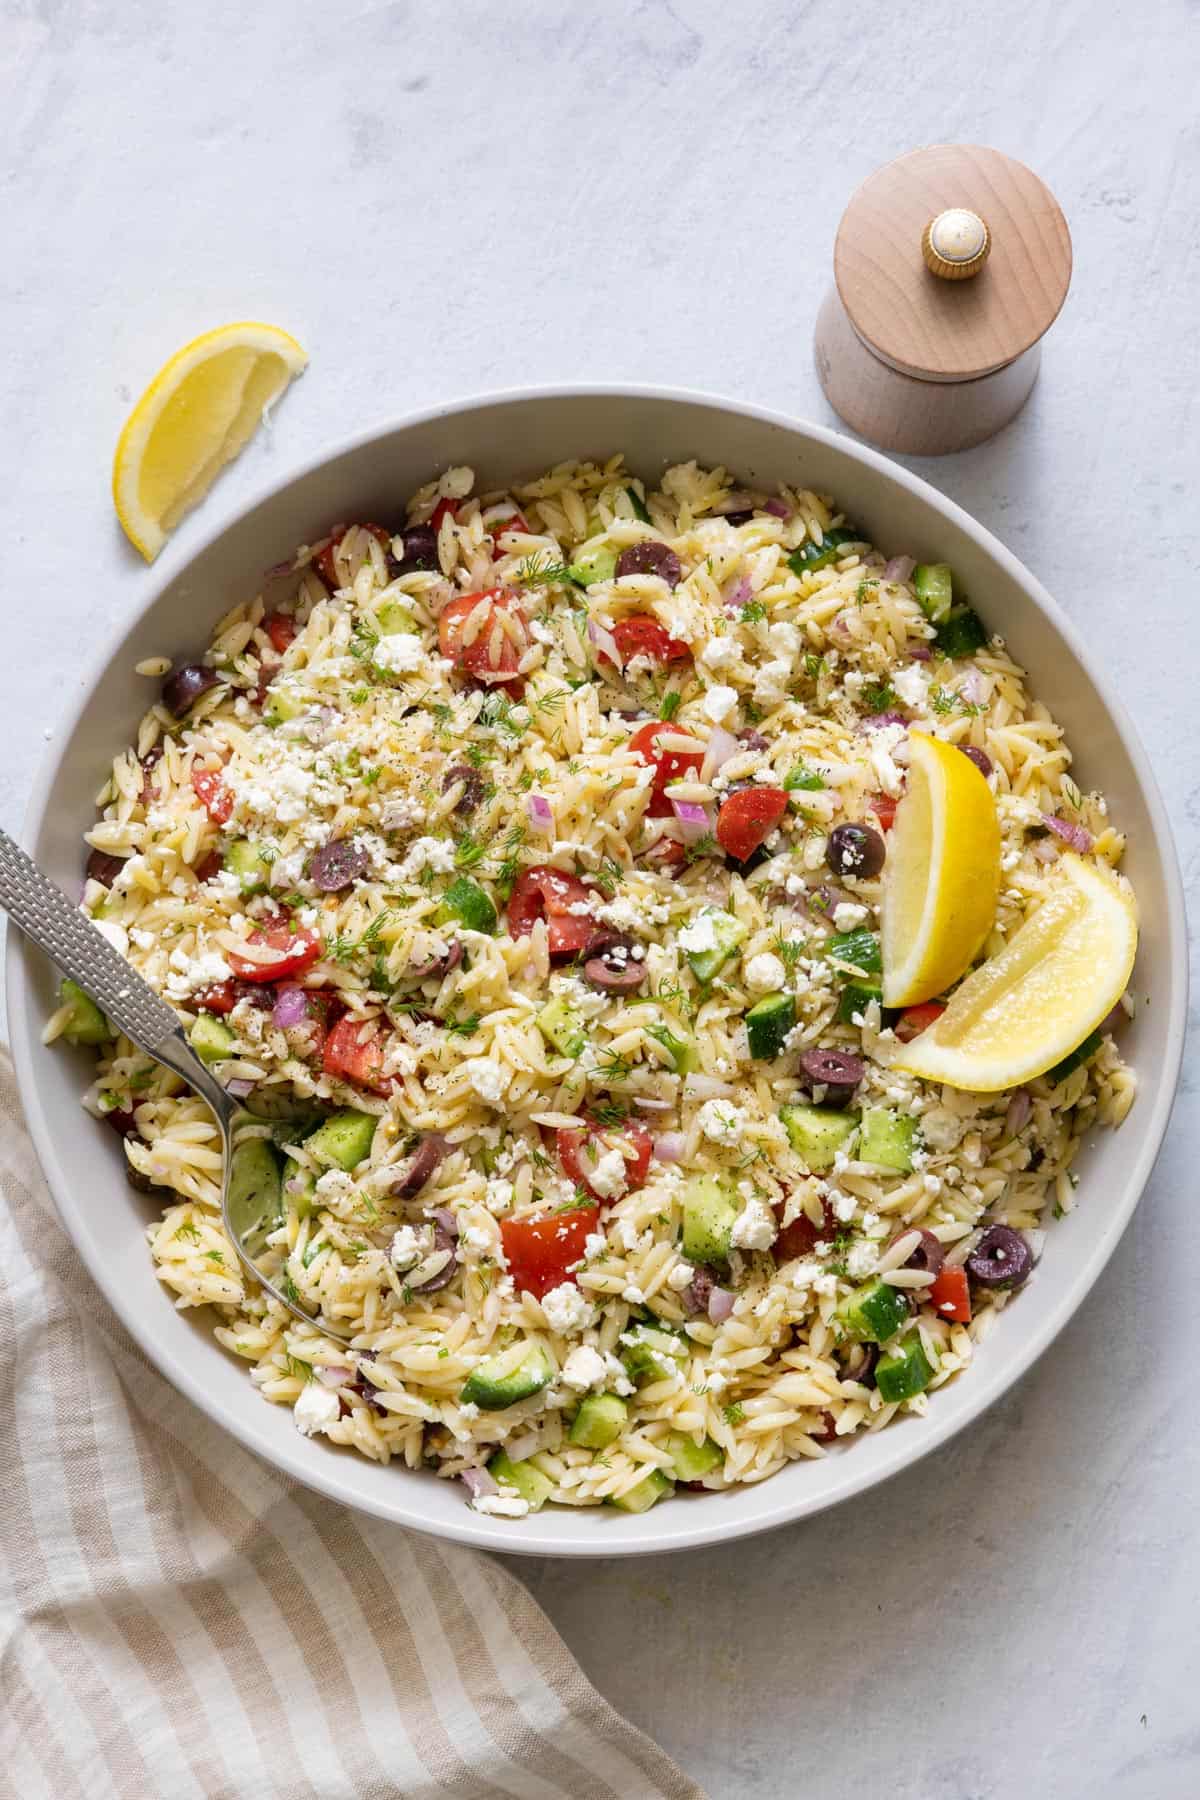 Large bowl of orzo salad with a dipped spoon and garnished with lemon wedges.